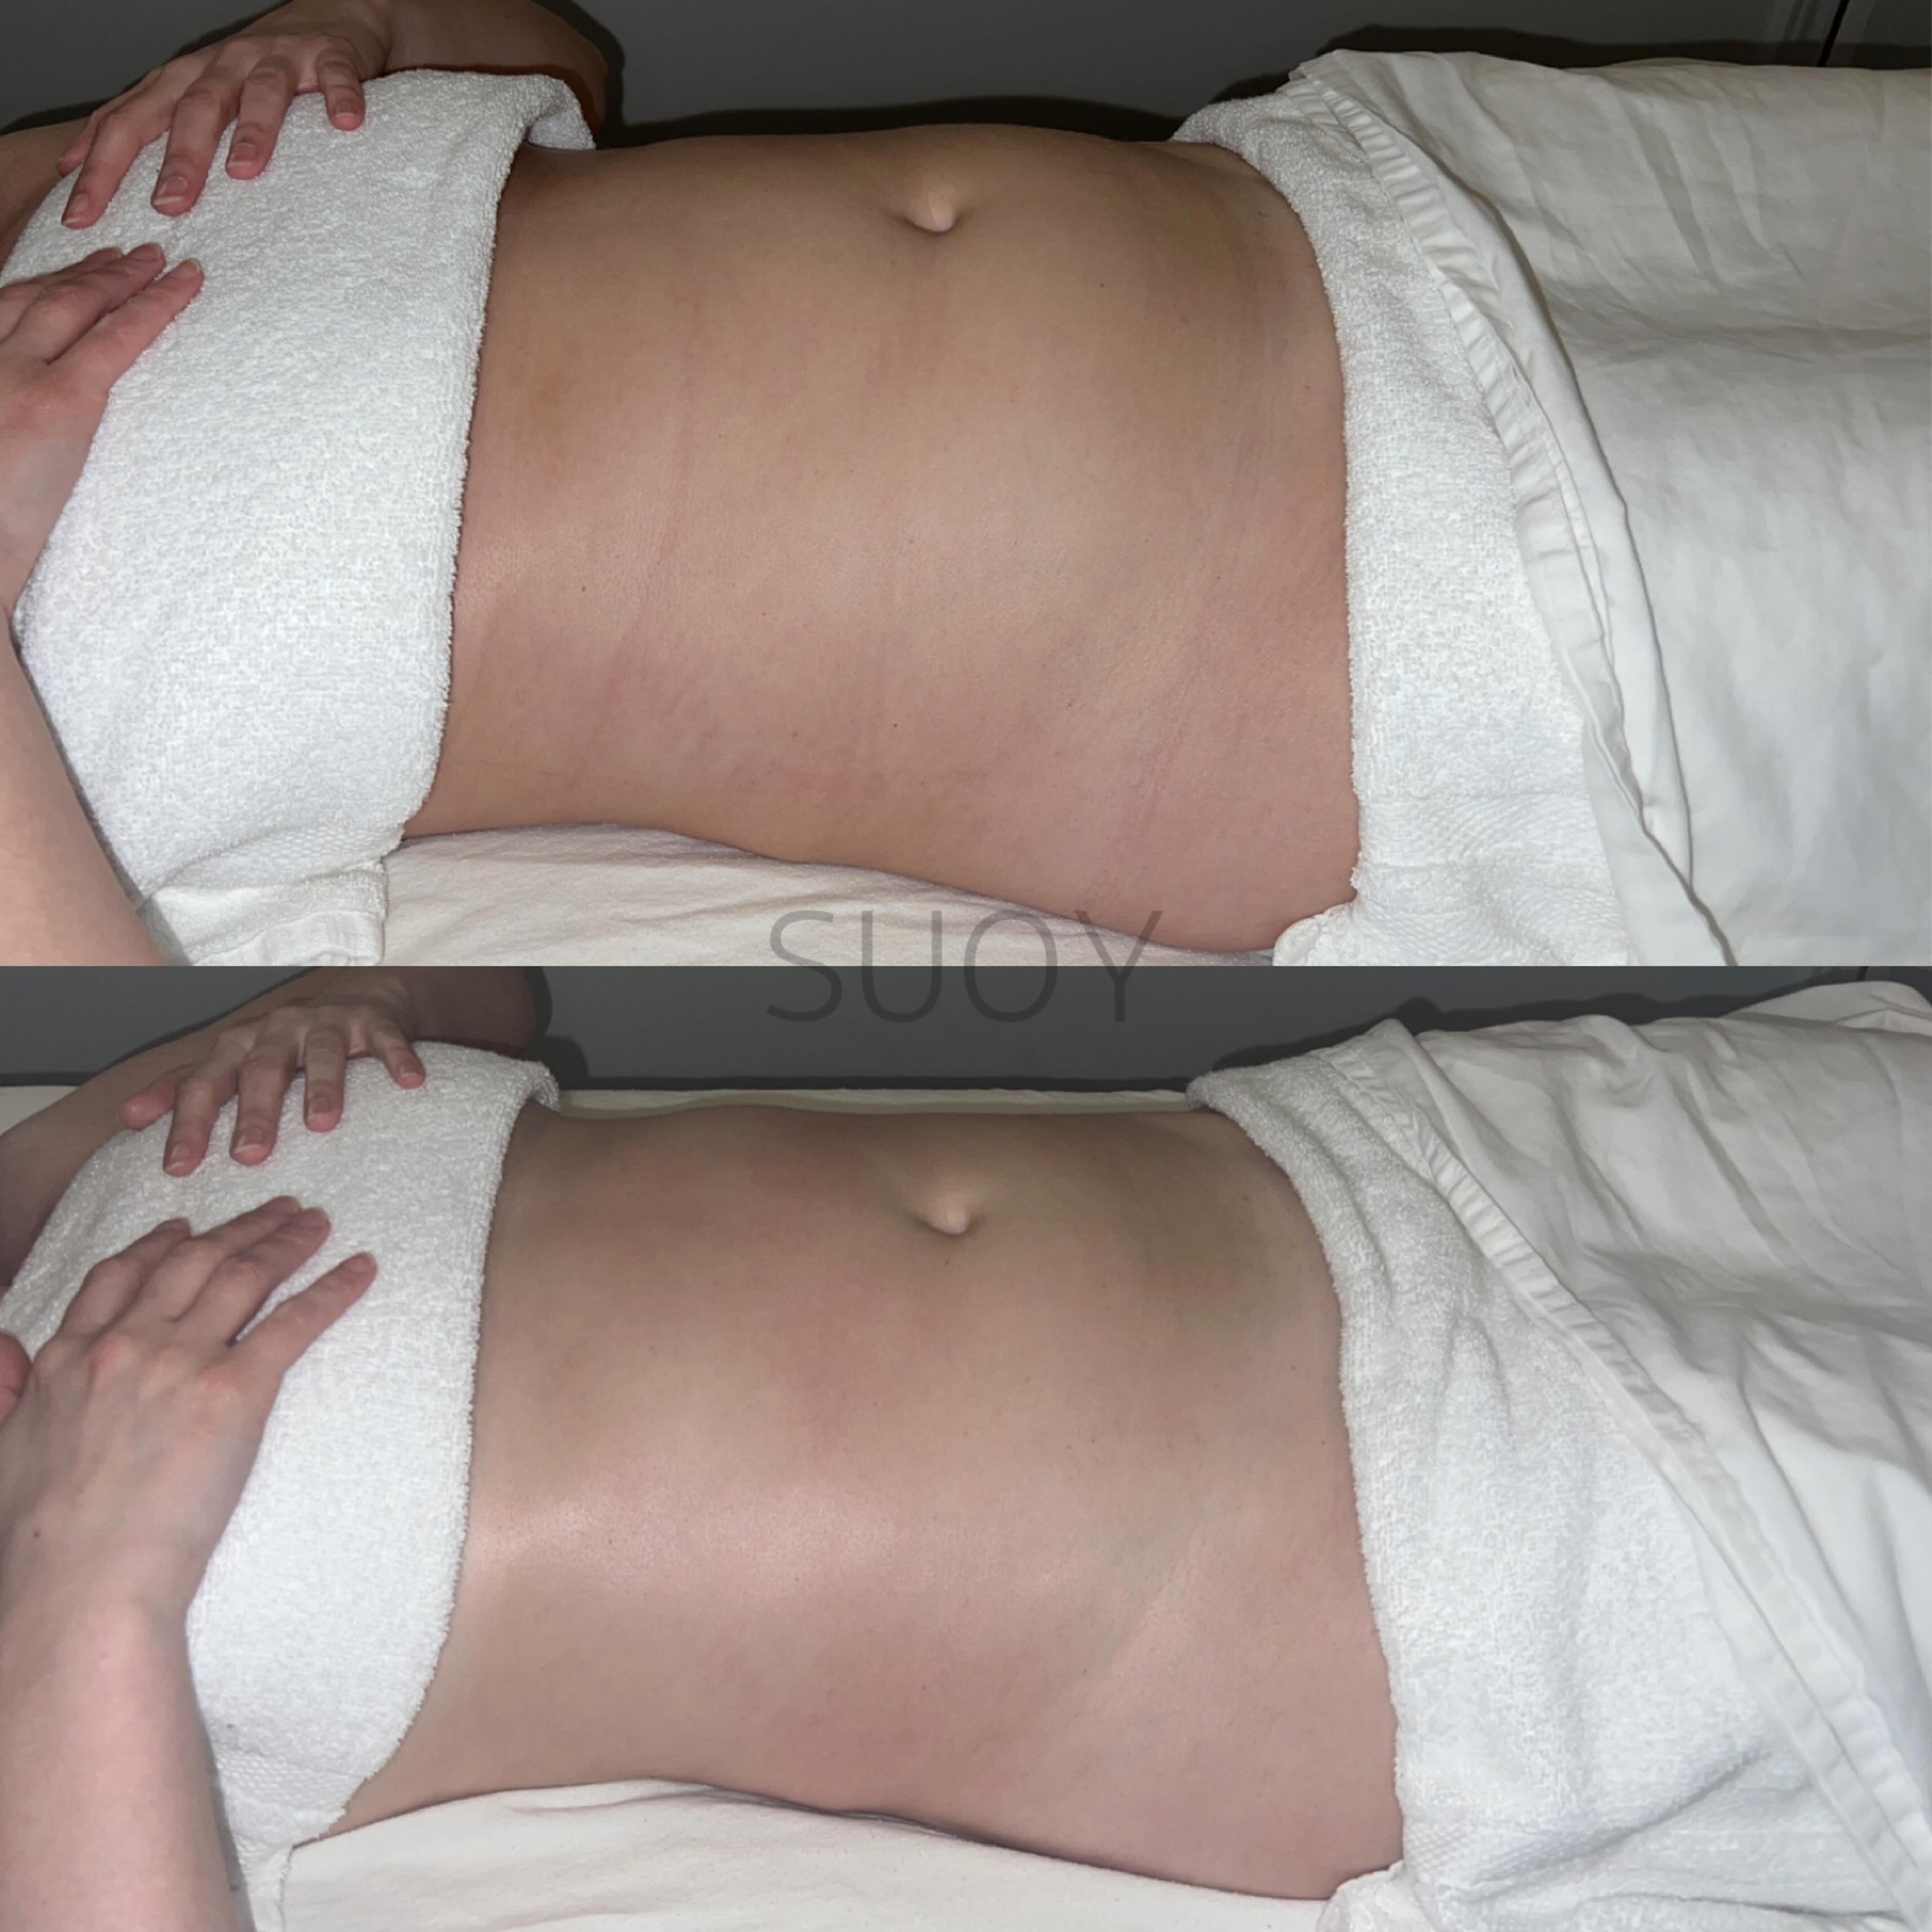 Brazilian Body Lymphatic Drainage Massage and Sculpting with techniques taught by Celebrity RMT Josie Rushing. 

Look what 50MINS can do! Top is before, bottom is after. 

We work on the WHOLE body! For us, this is more for health benefits than it is